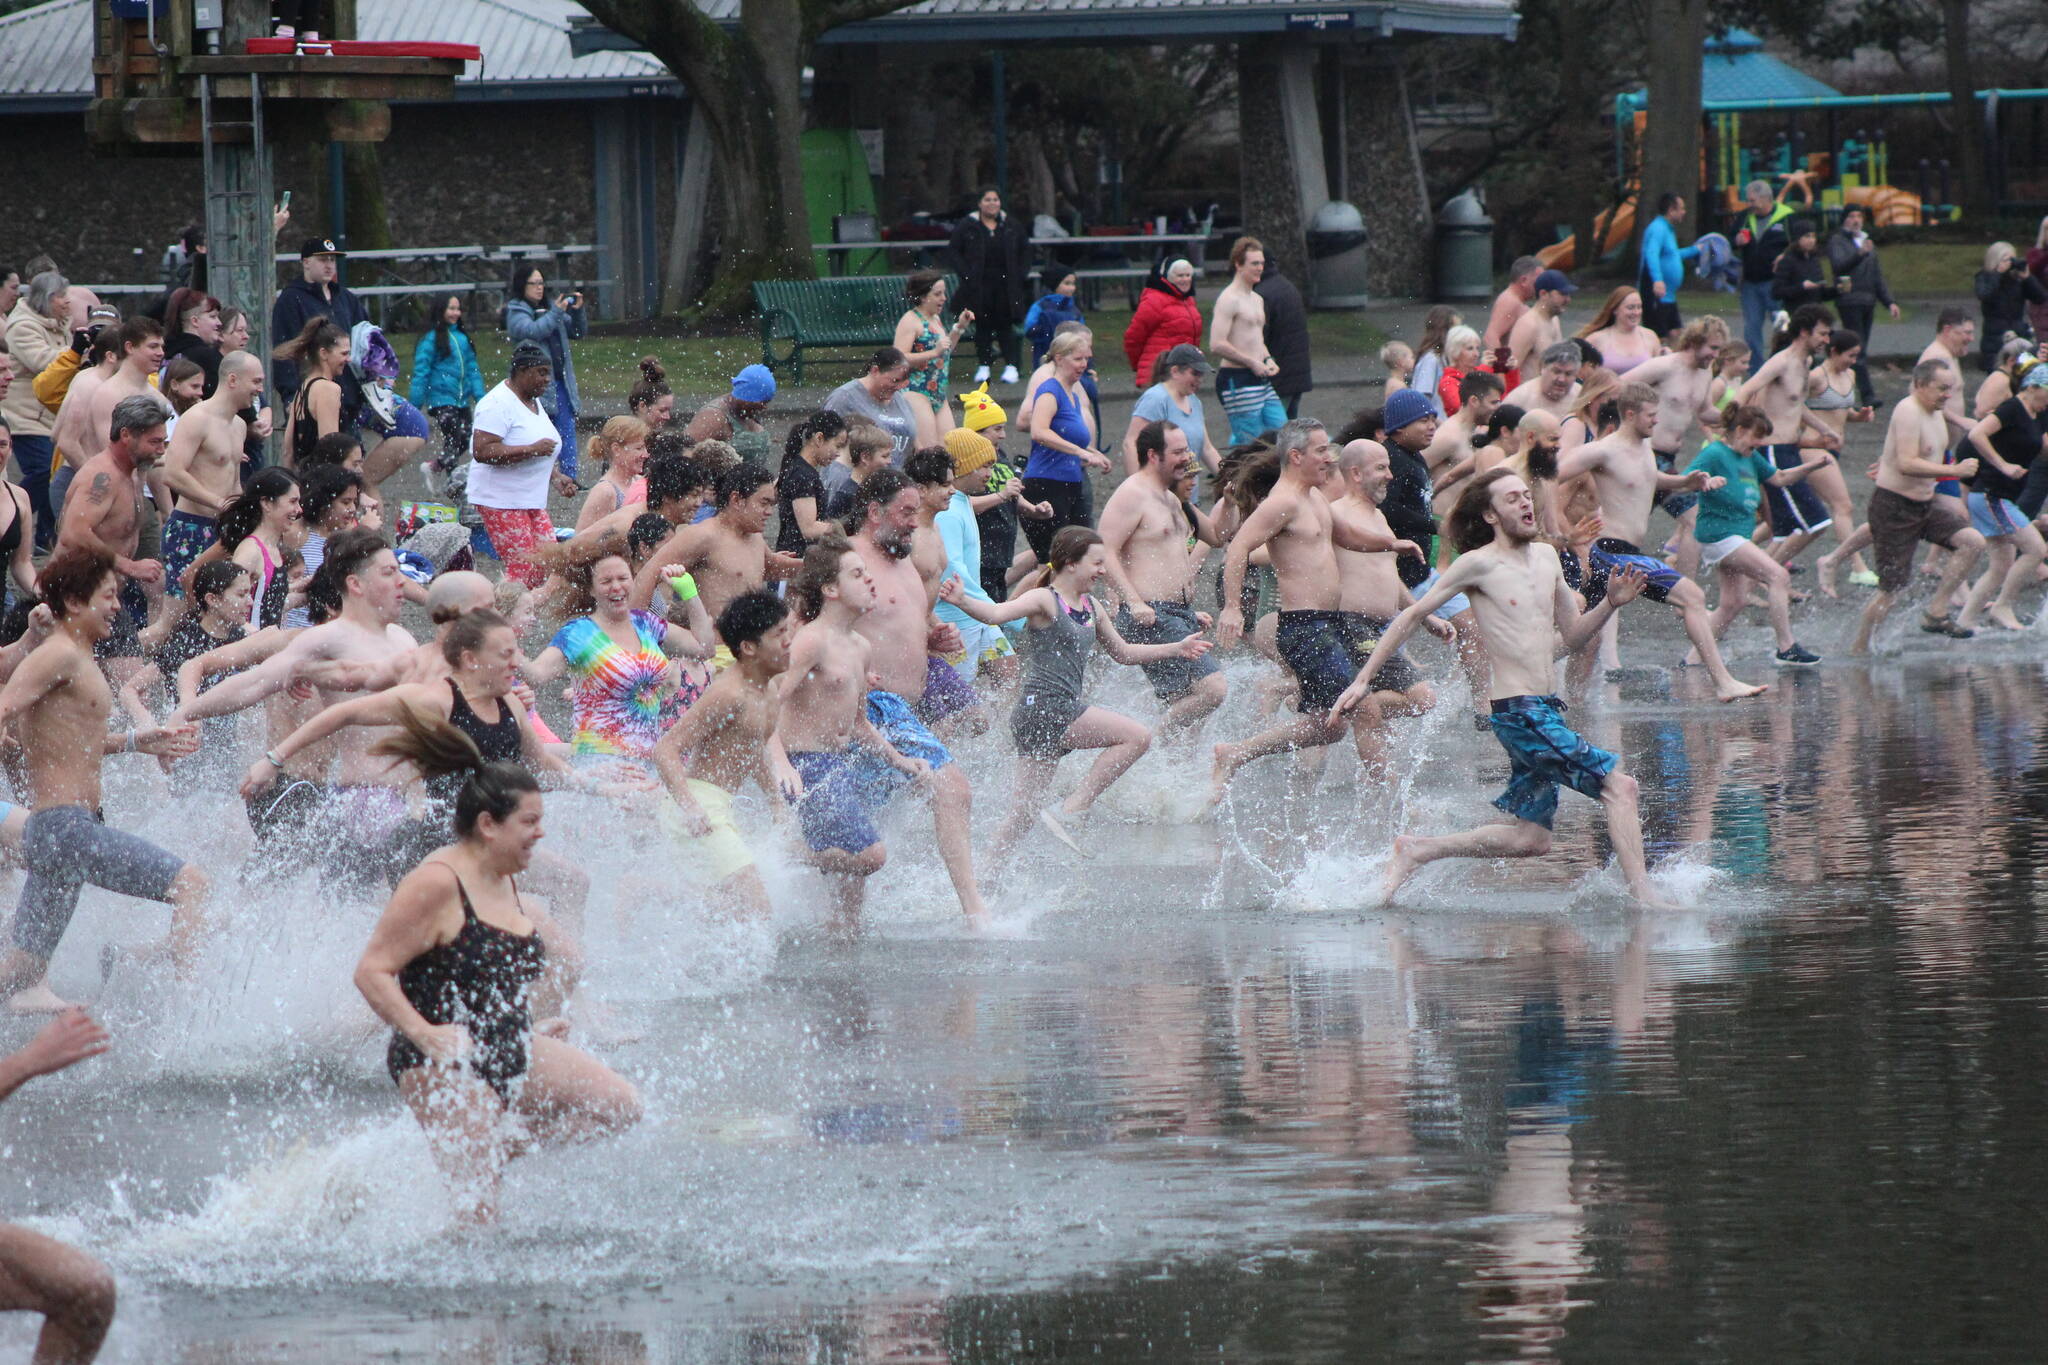 On your mark, get set, plunge! Swimmers jump into the cold water at Renton’s Gene Coulon Park on Jan. 1. Bailey Jo Josie/Sound Publishing.